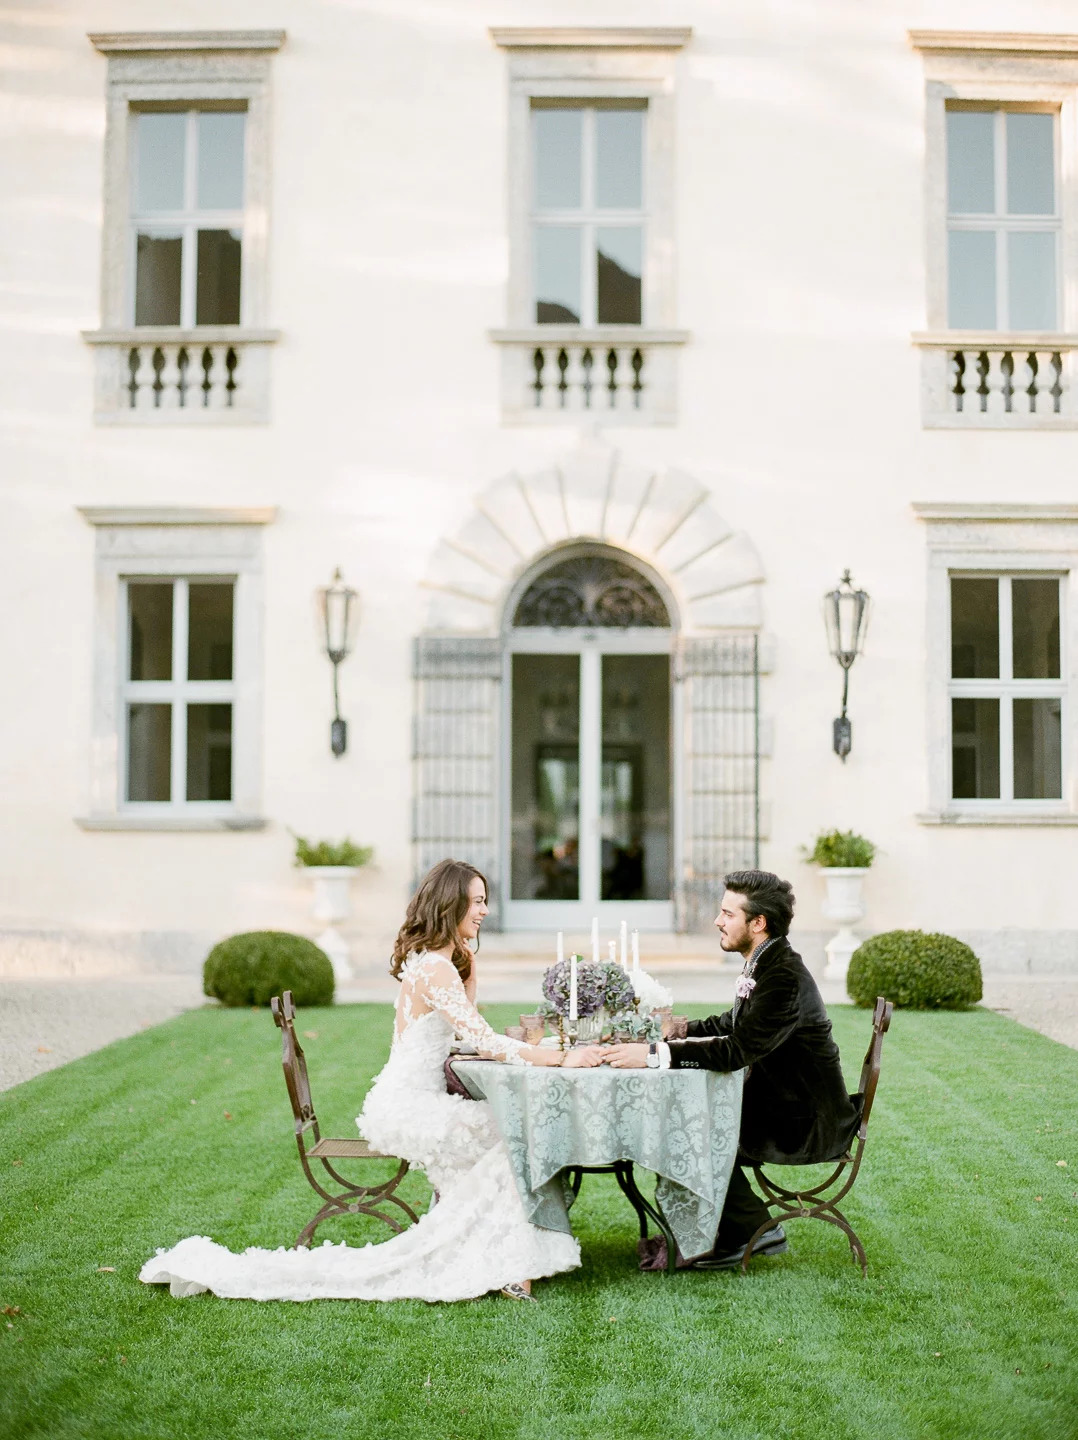 Villa Balbiano is a top spot for any dream wedding